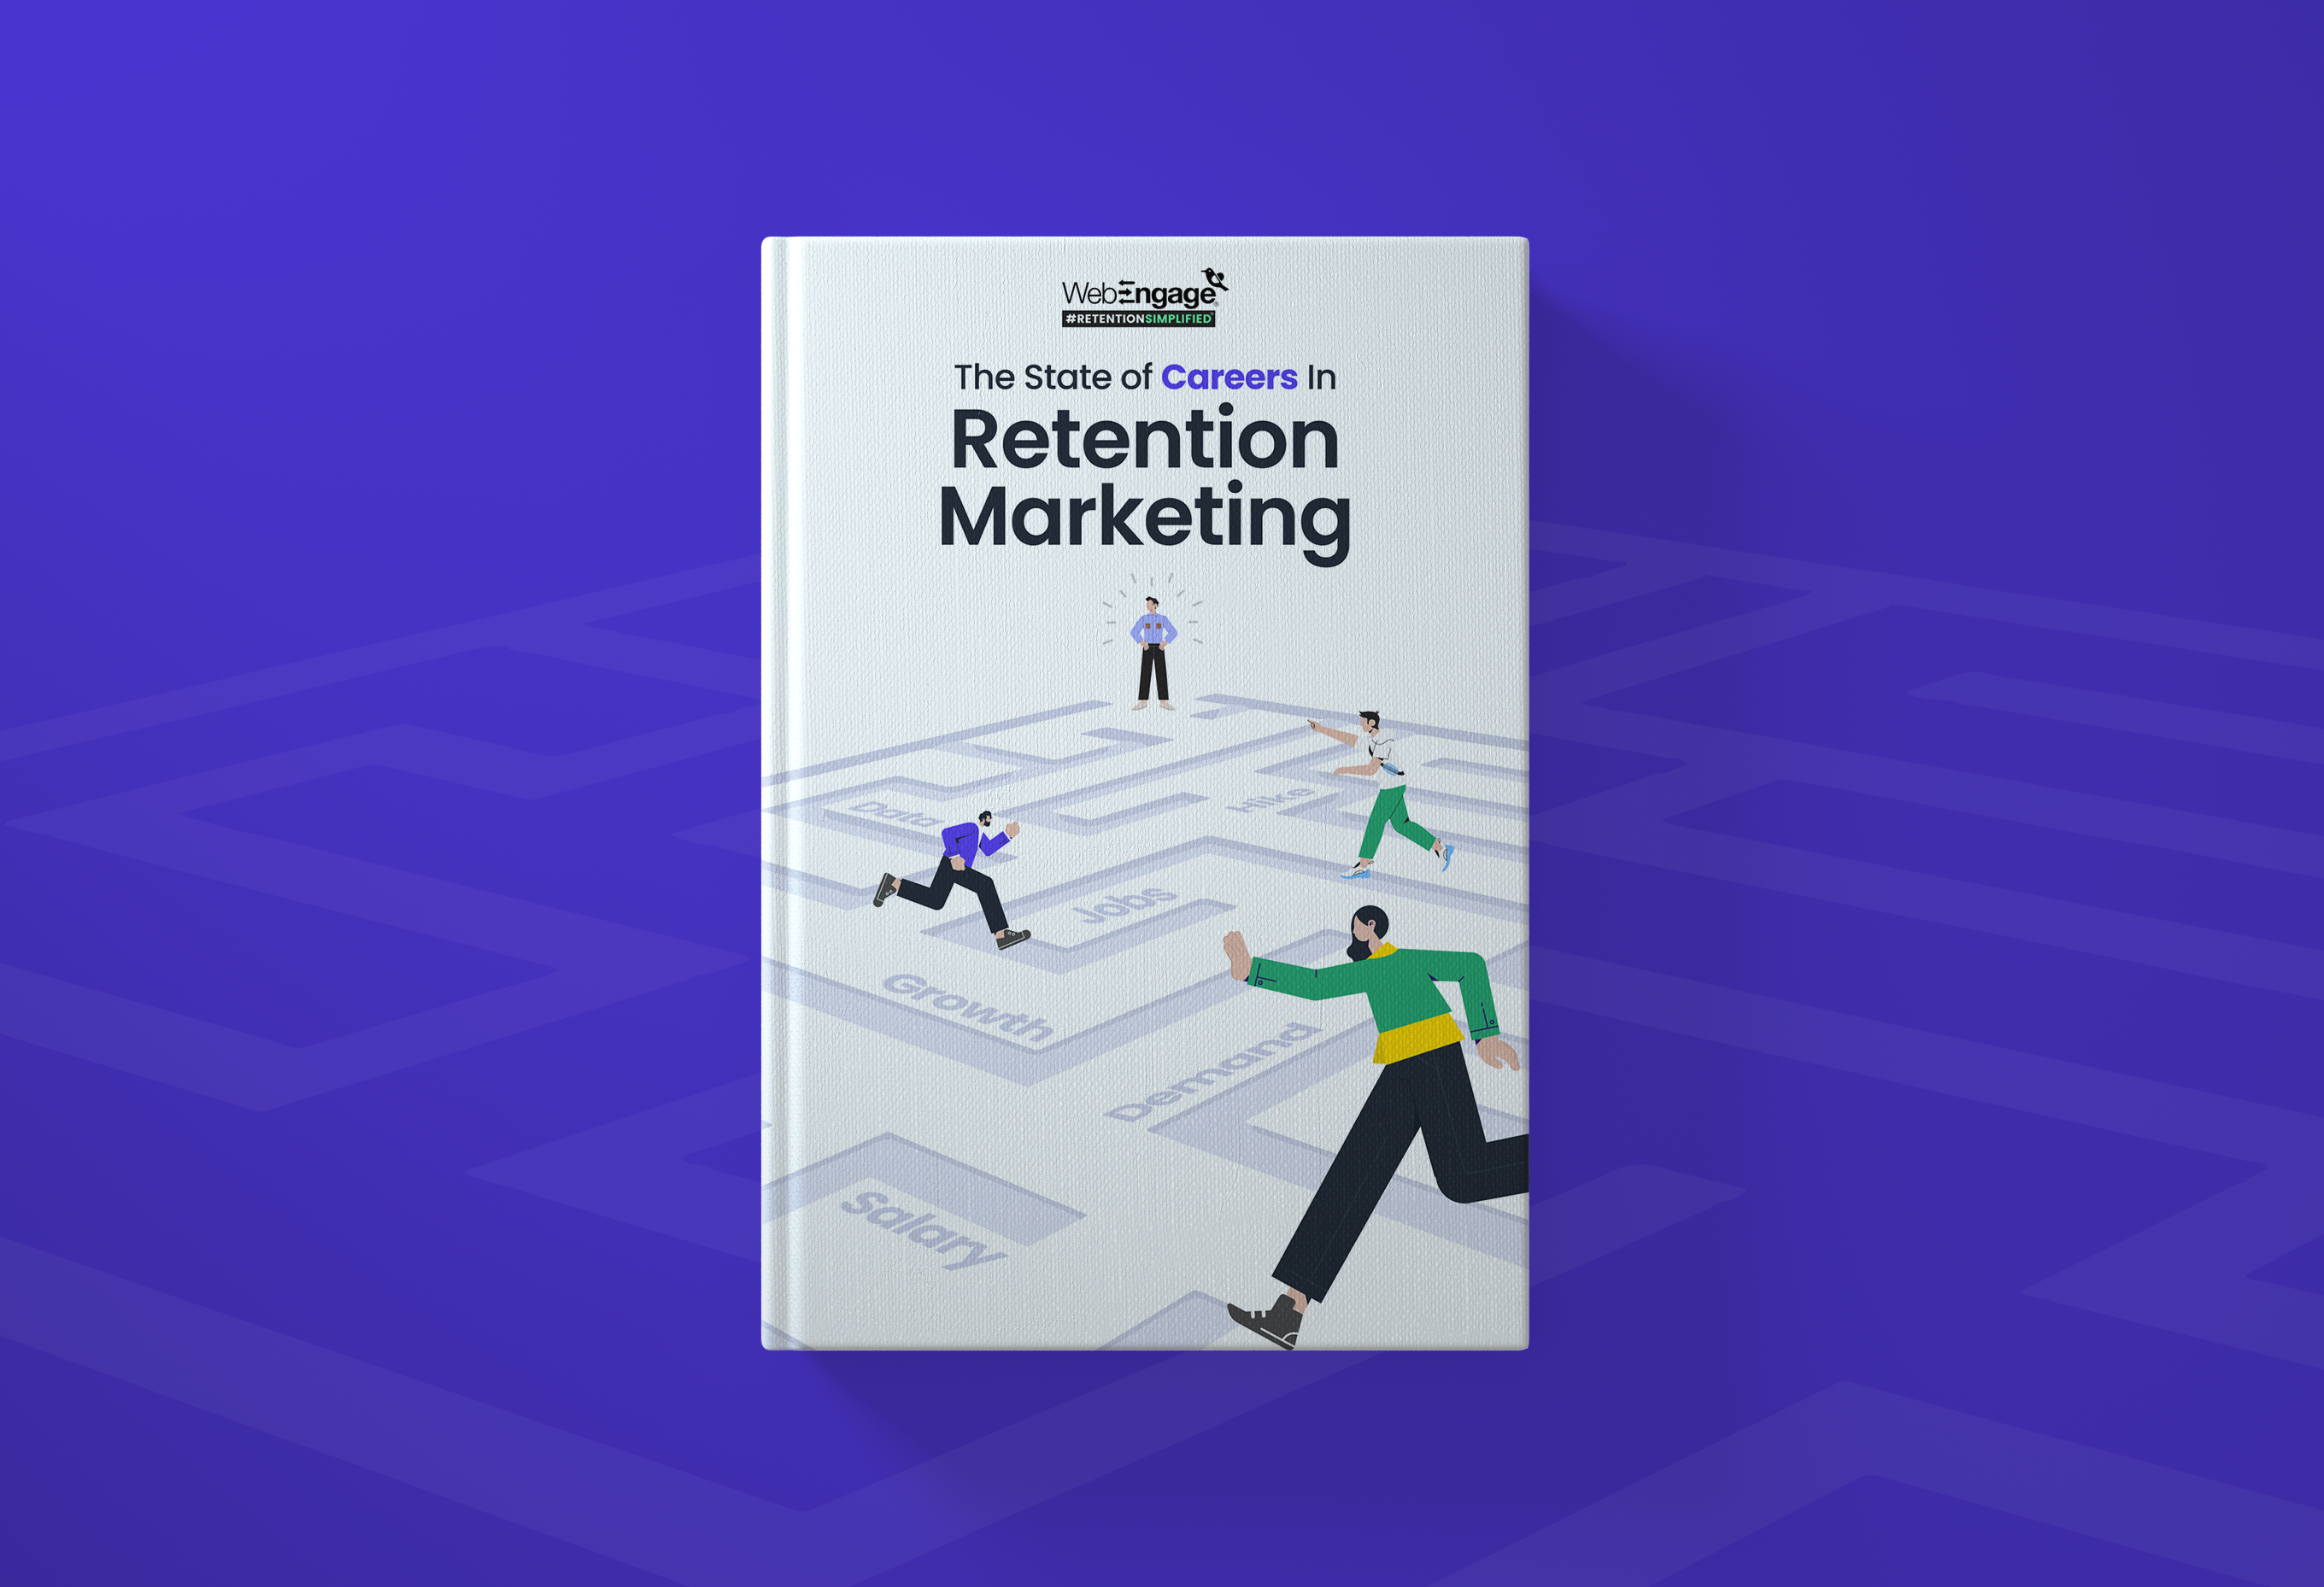 The state of careers in retention marketing